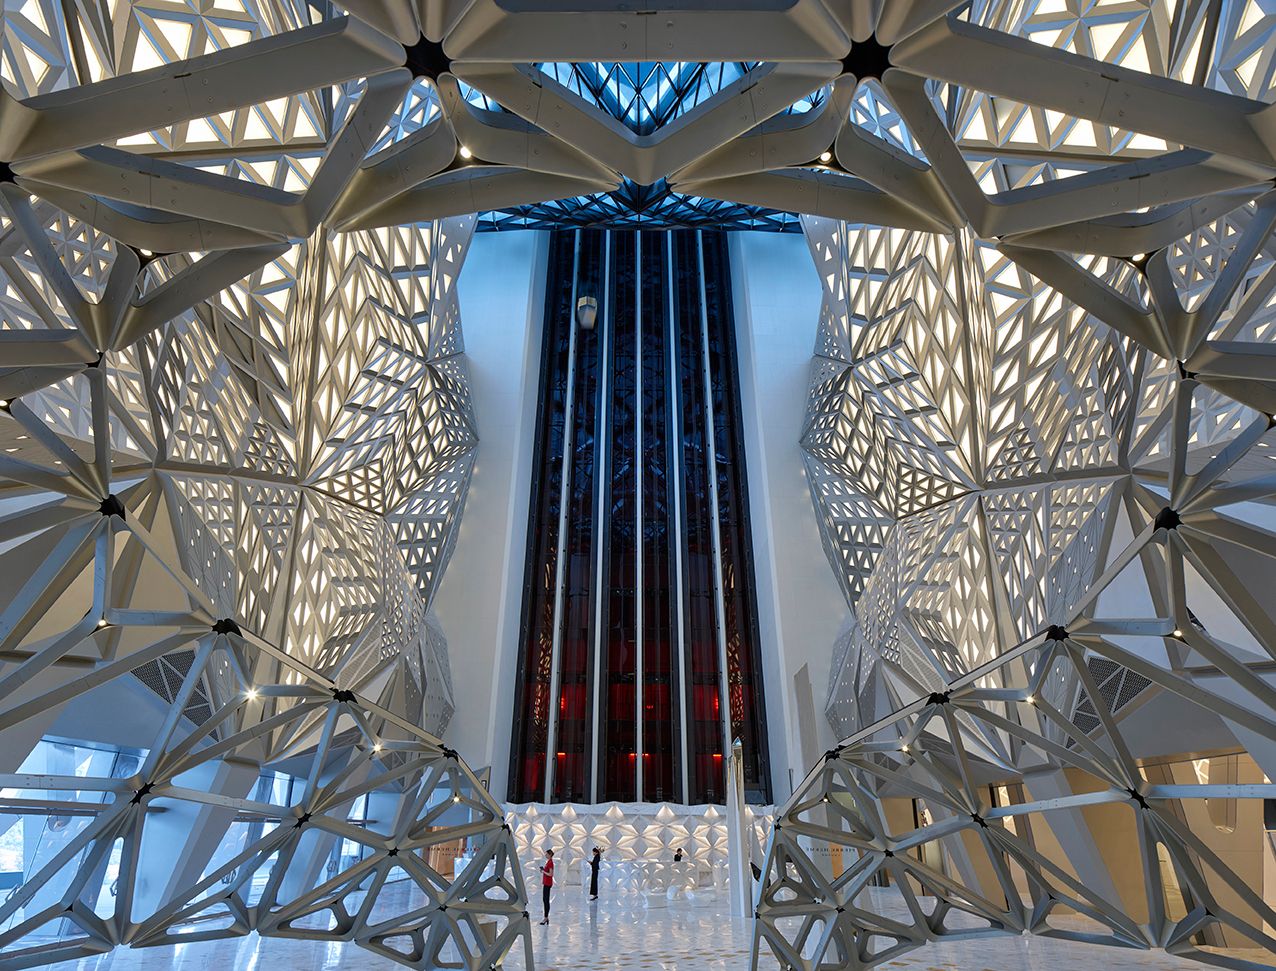 the dynamic interiors of Morpheus Hotel formed by triangular shapes protruding from the wall